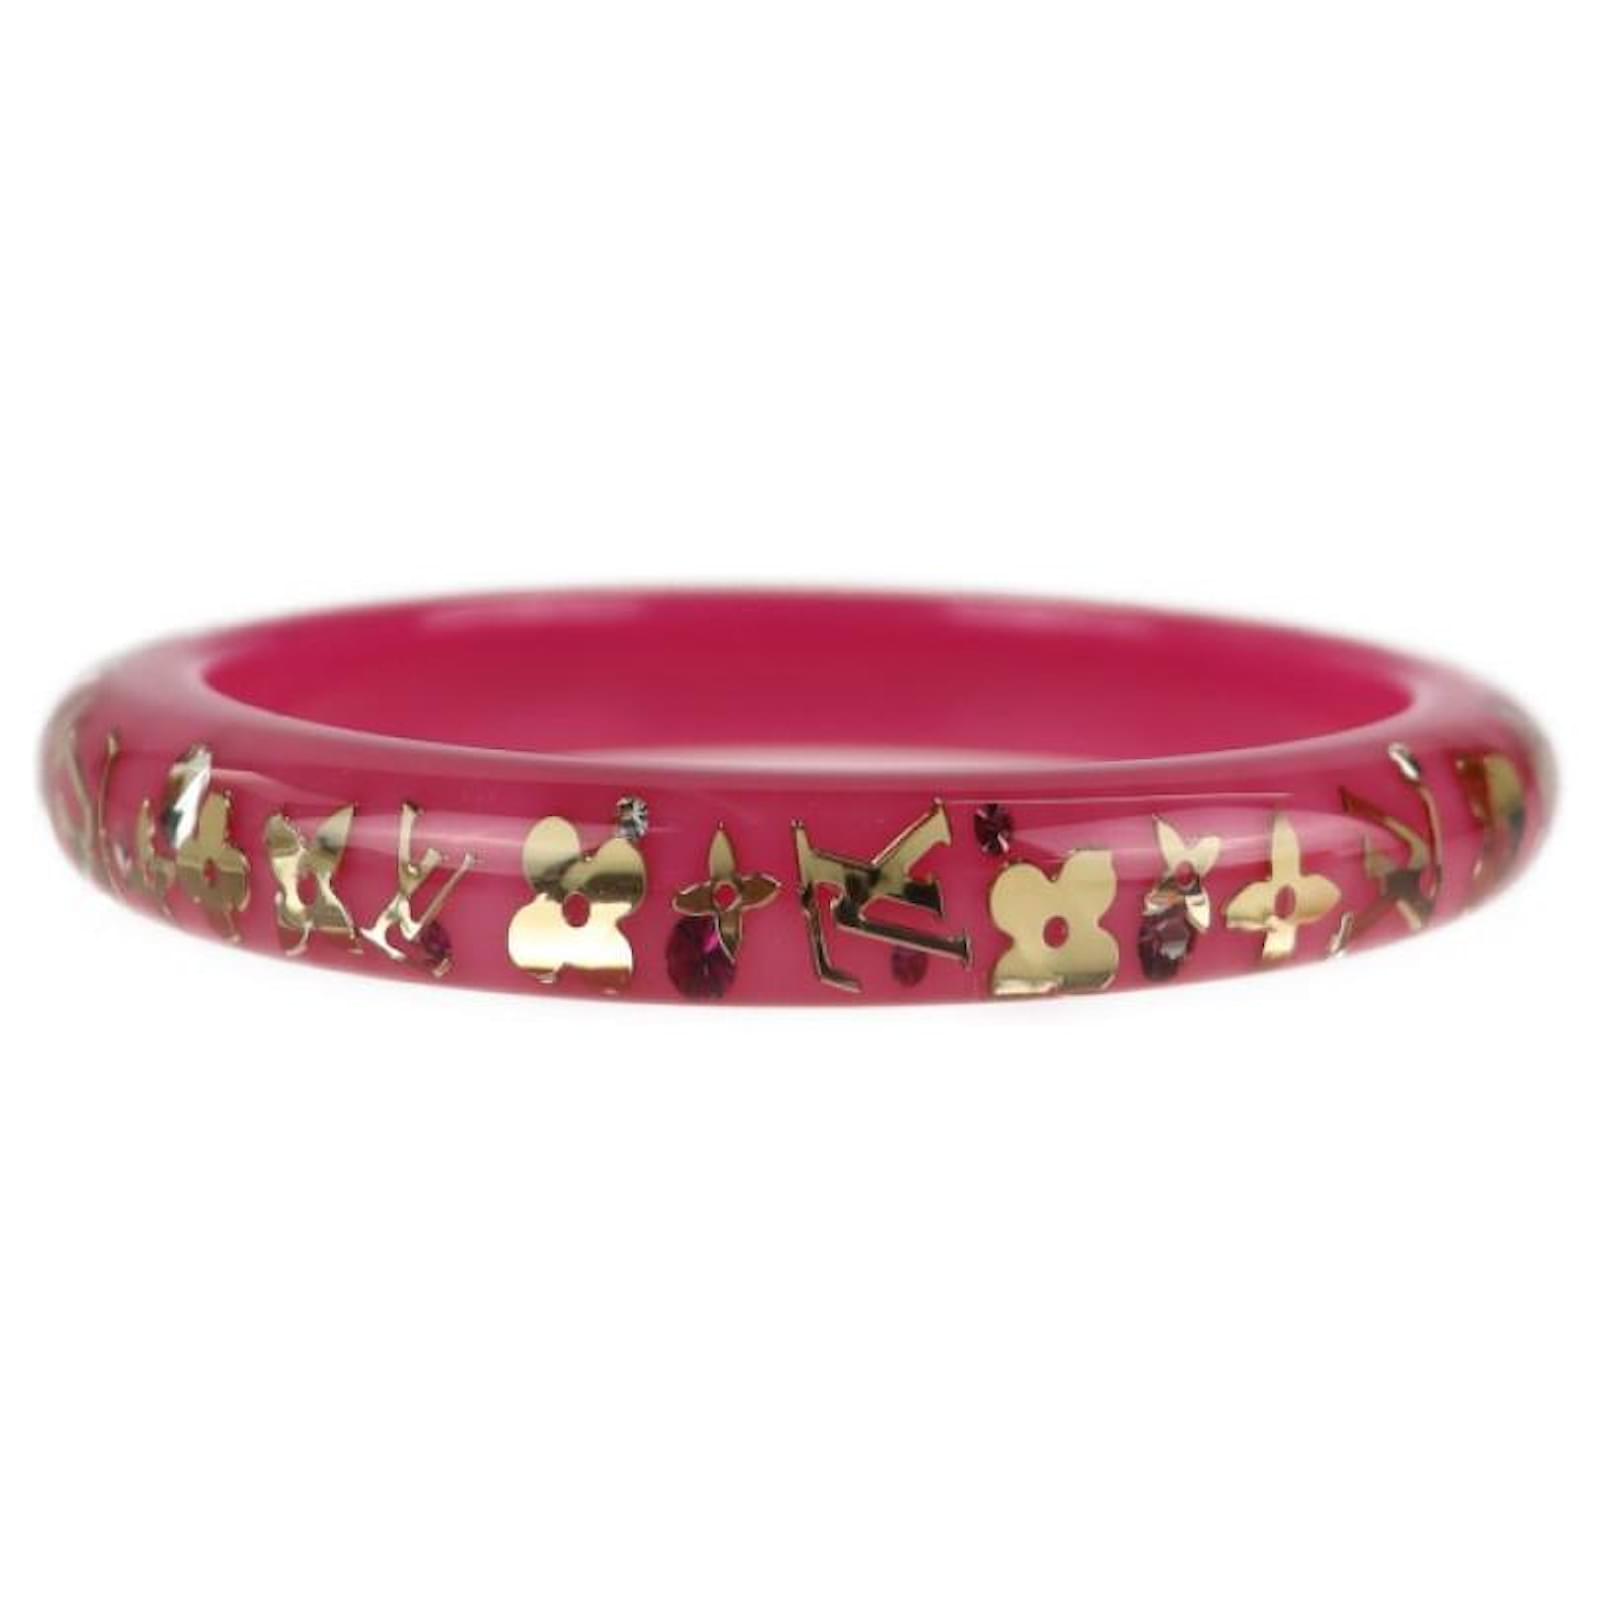 Used] LOUIS VUITTON Brass Lean Cruise M65578 Bangle Plastic Pink